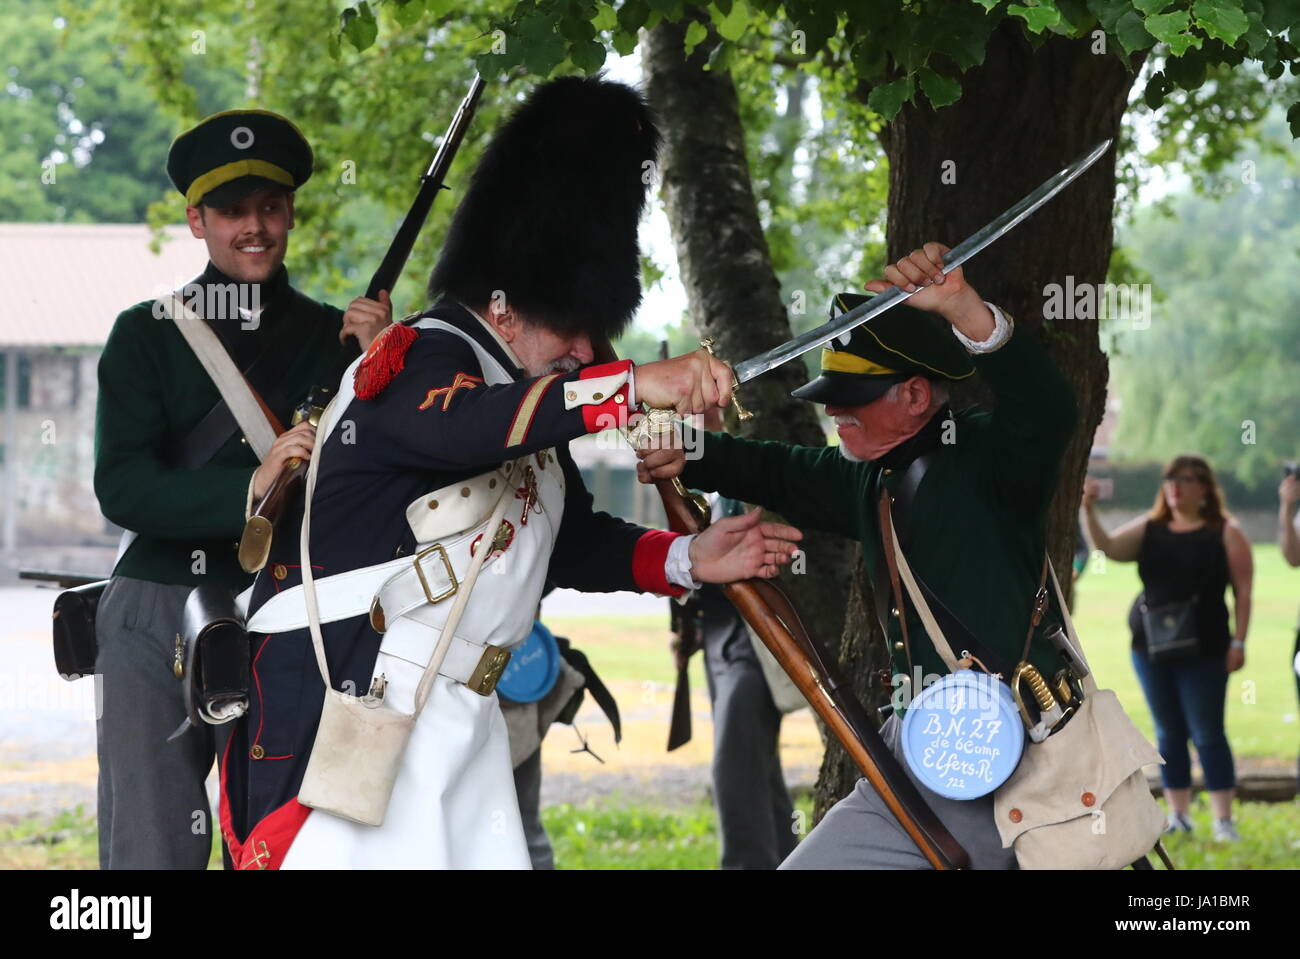 Ligny, Belgium. 3rd June, 2017. Participants take part in the re-enactment of the Battle of Ligny, in Ligny, Belgium, June 3, 2017. The Battle of Ligny took place on June 16, 1815, and was the final victory in the military career of Napoleon Bonaparte in which his troops defeated a Prussian force. Credit: Gong Bing/Xinhua/Alamy Live News Stock Photo